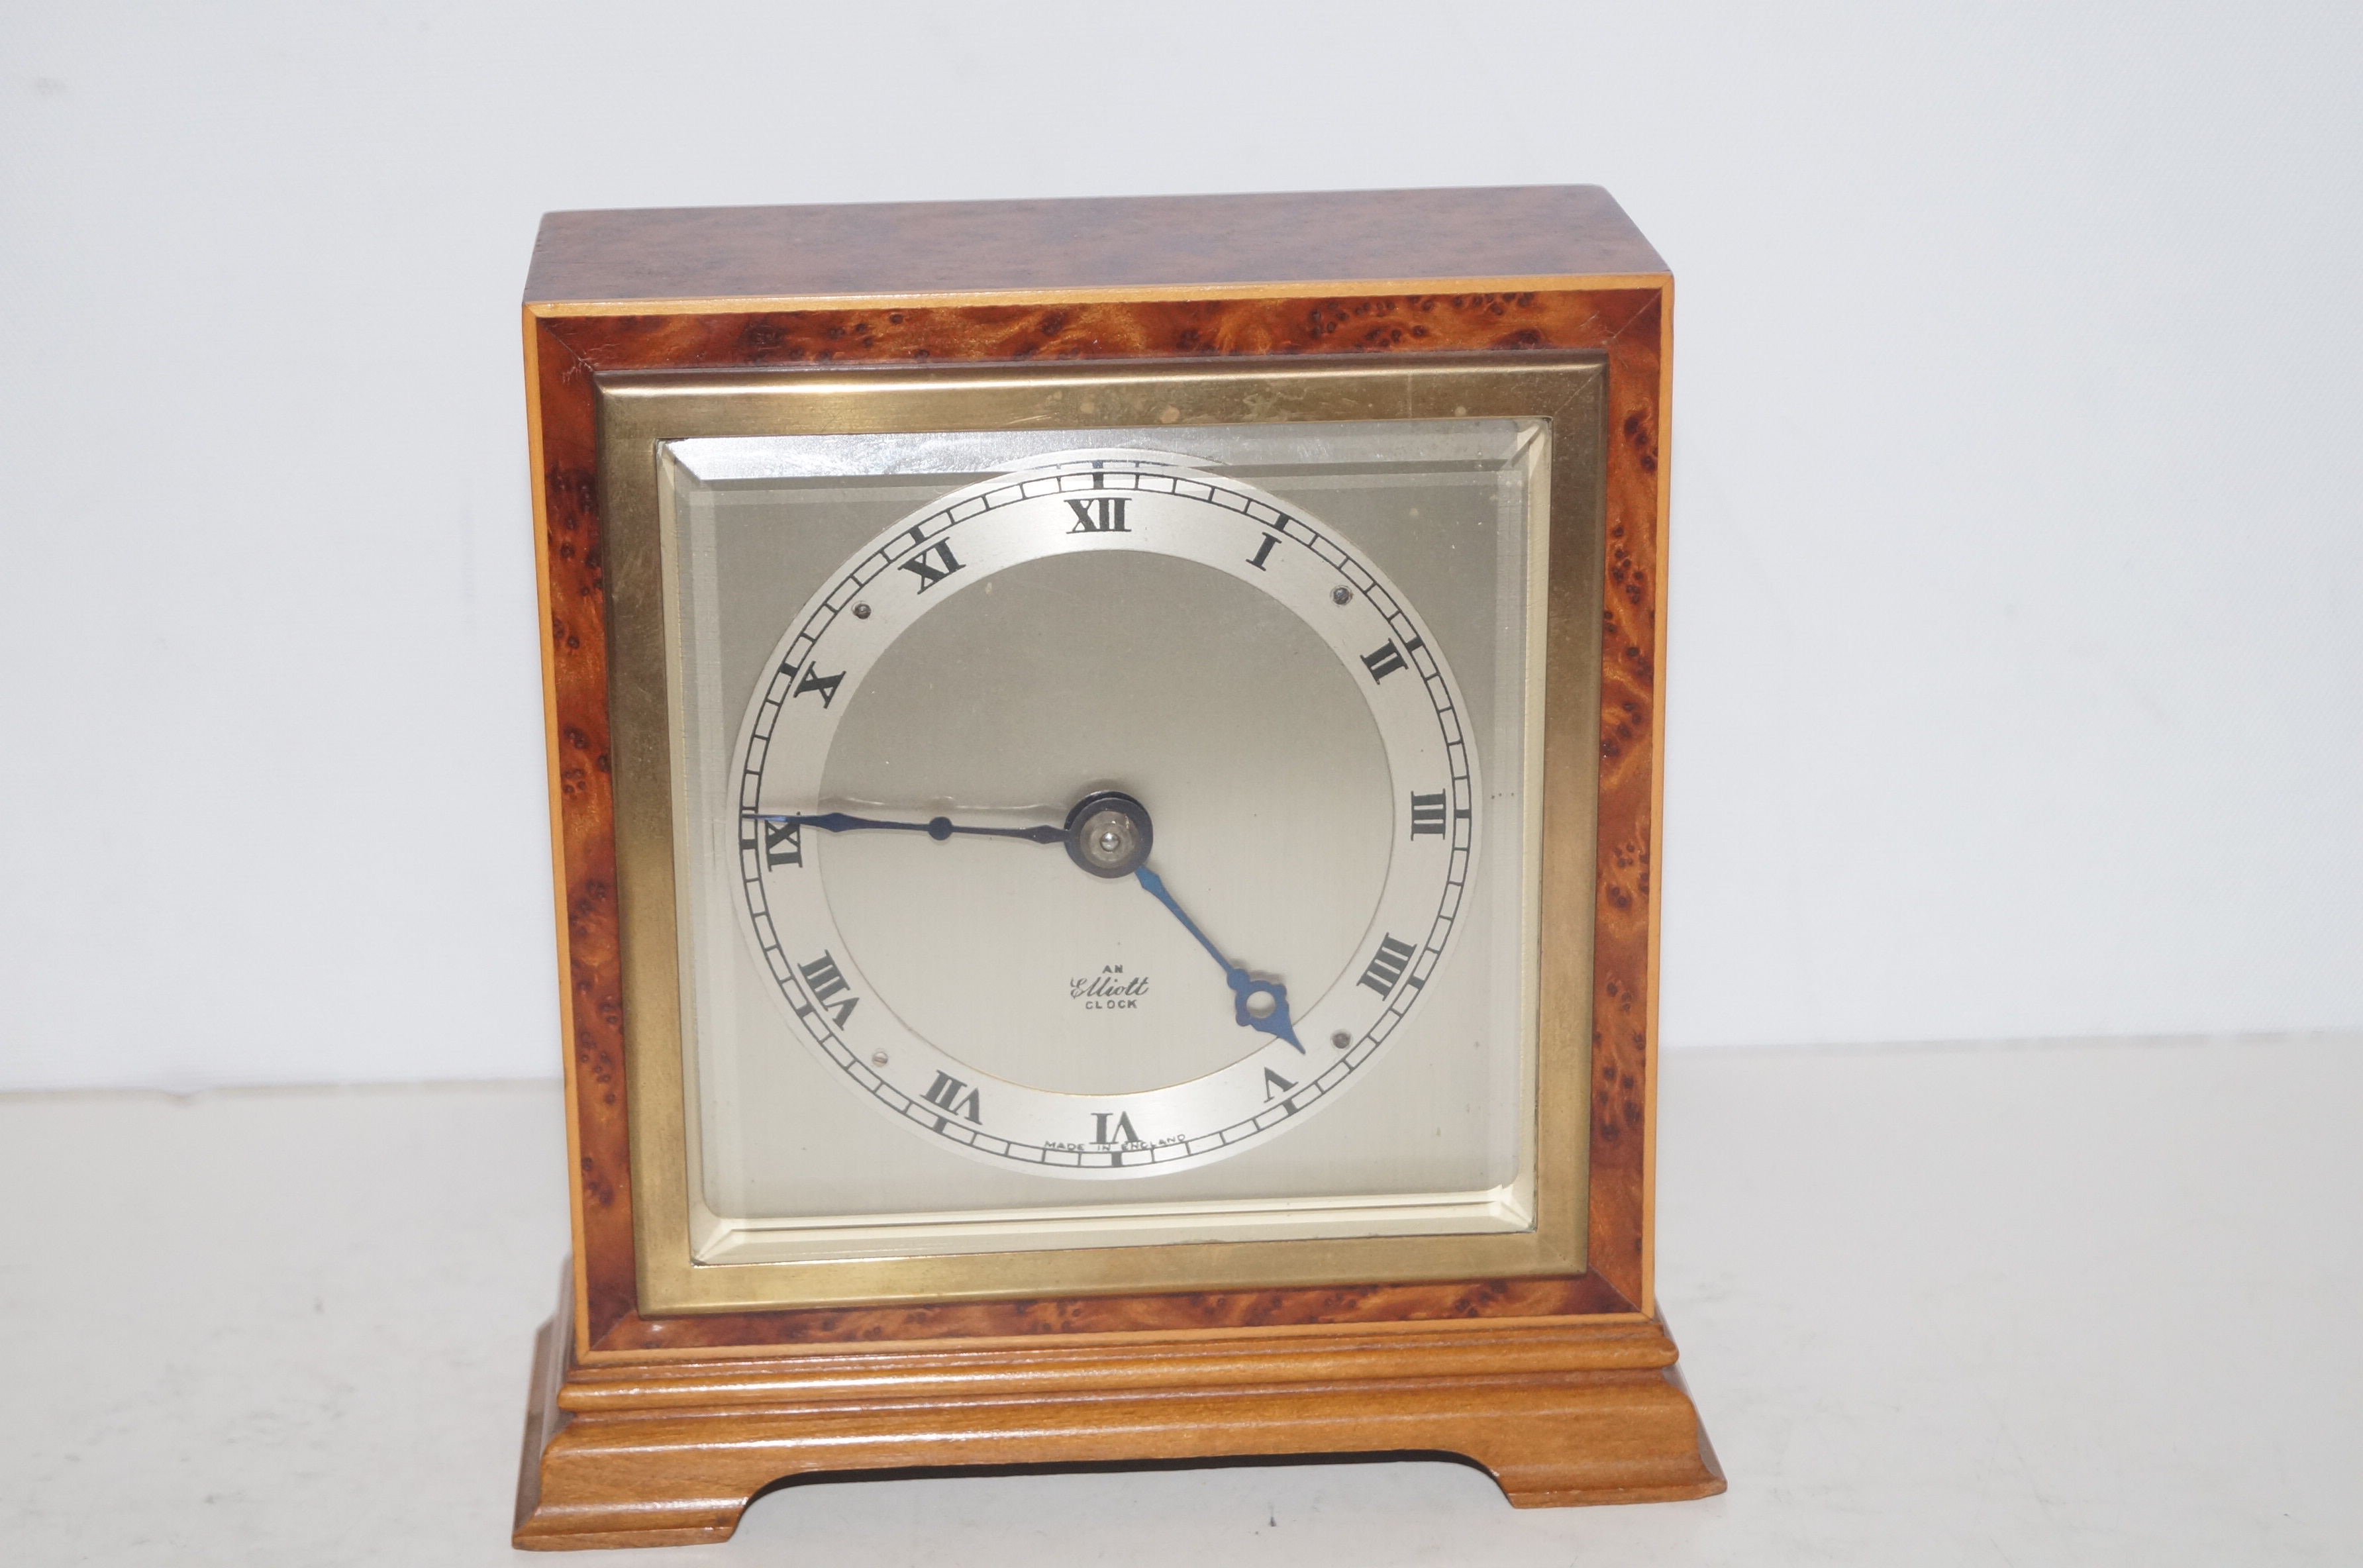 Elliott mantle clock in excellent condition and re